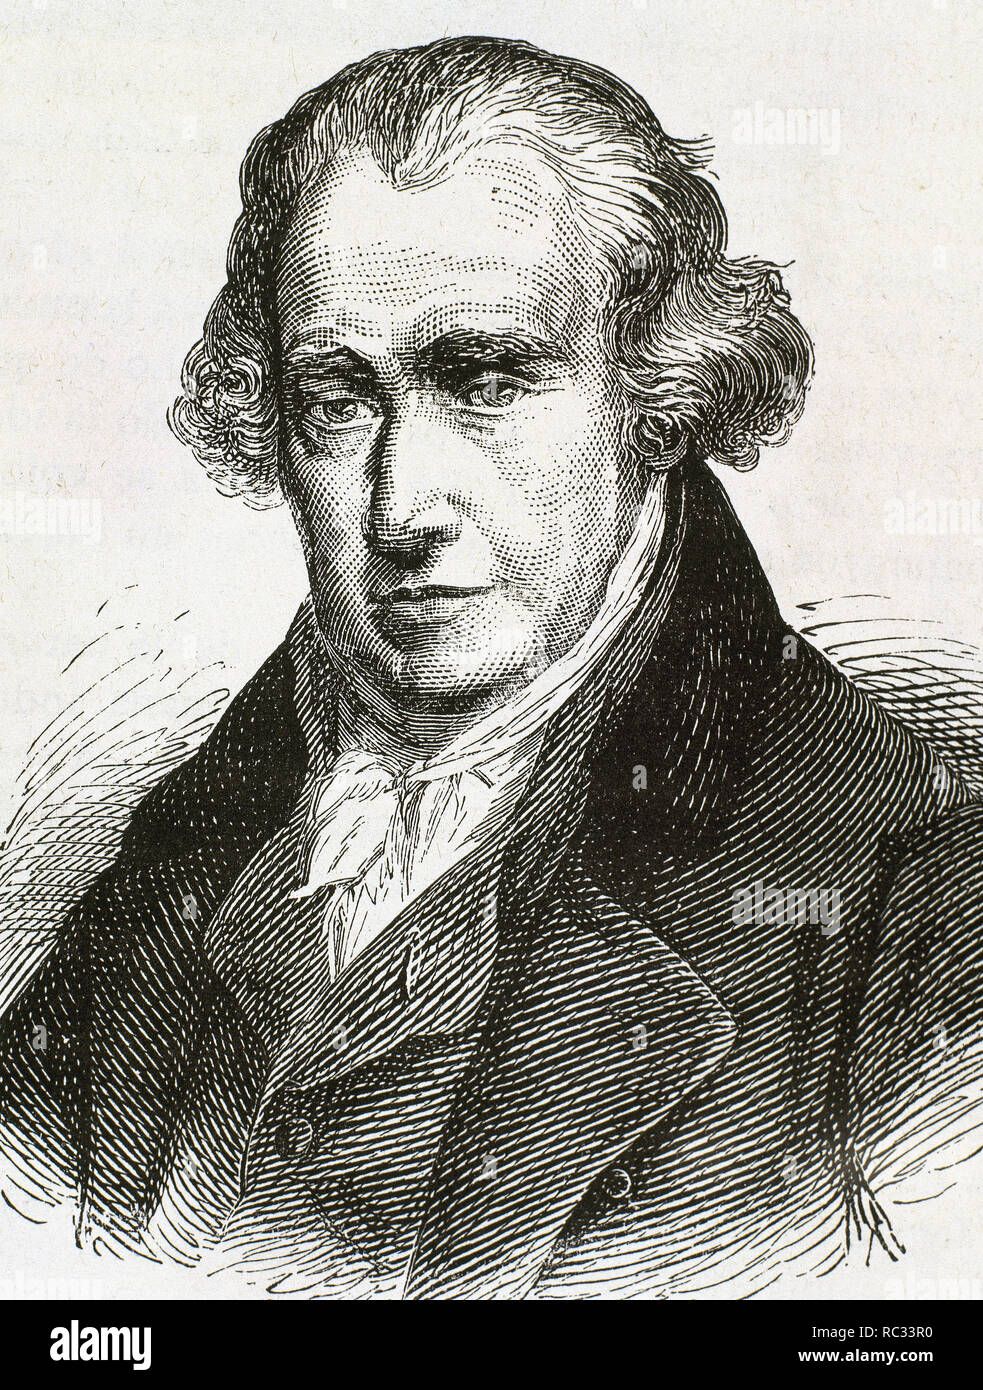 JAMES WATT (1736/1819)  Scottish inventor, mechanical engineer, and chemist who improved on Thomas Newcomen's 1712 Newcomen steam engine with his Watt steam engine in 1781. 18th century. ENGRAVING. Stock Photo